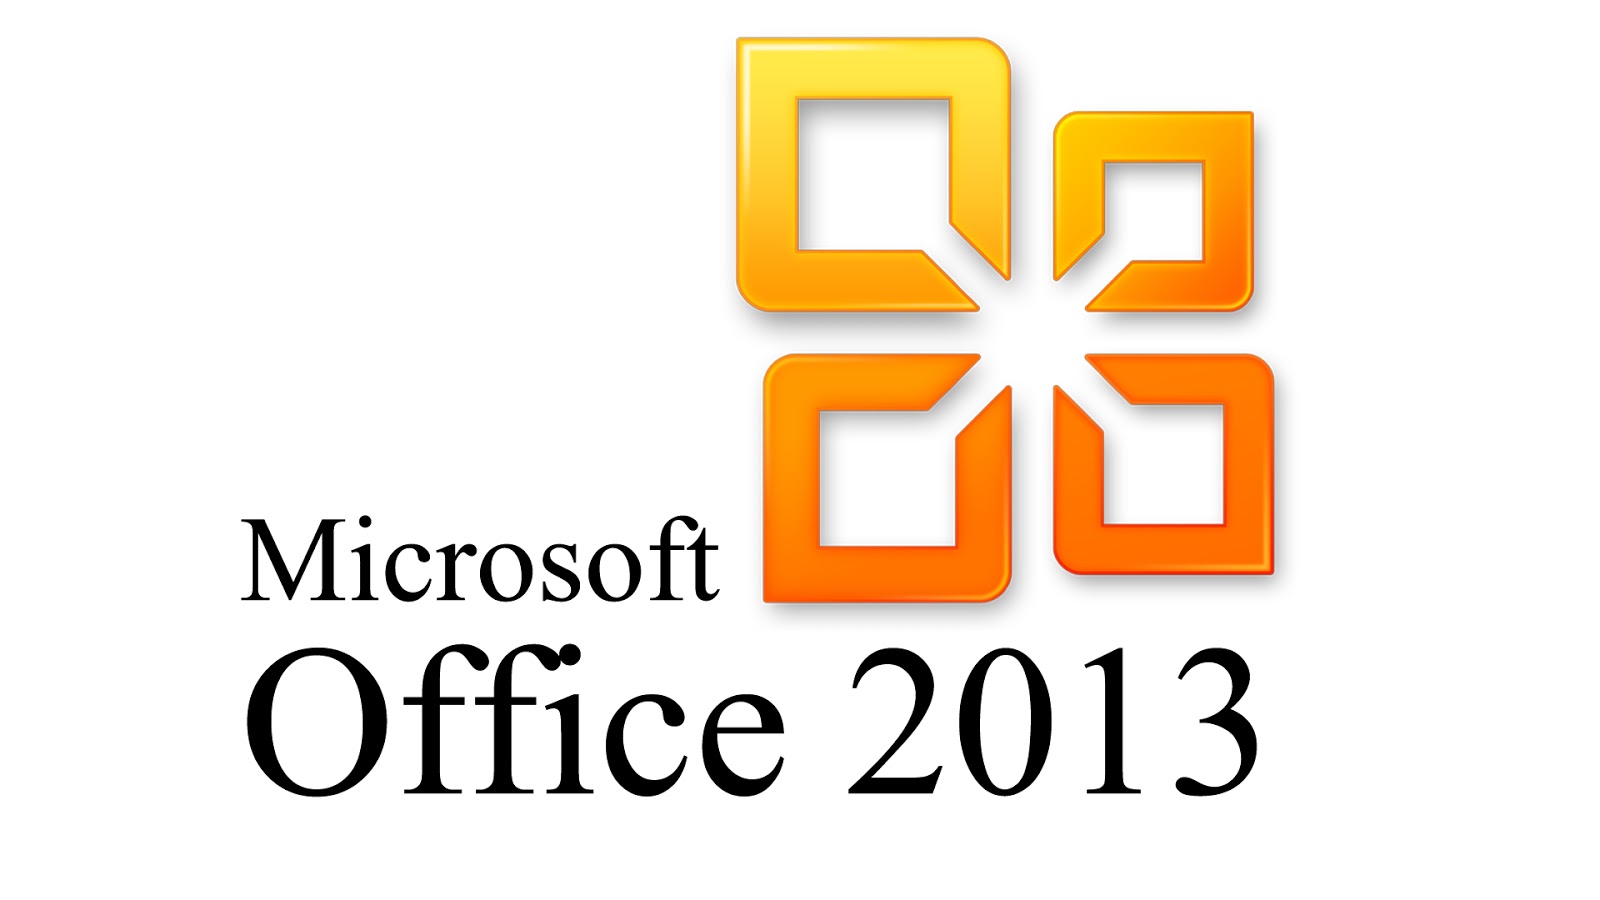 office 2013 software free download